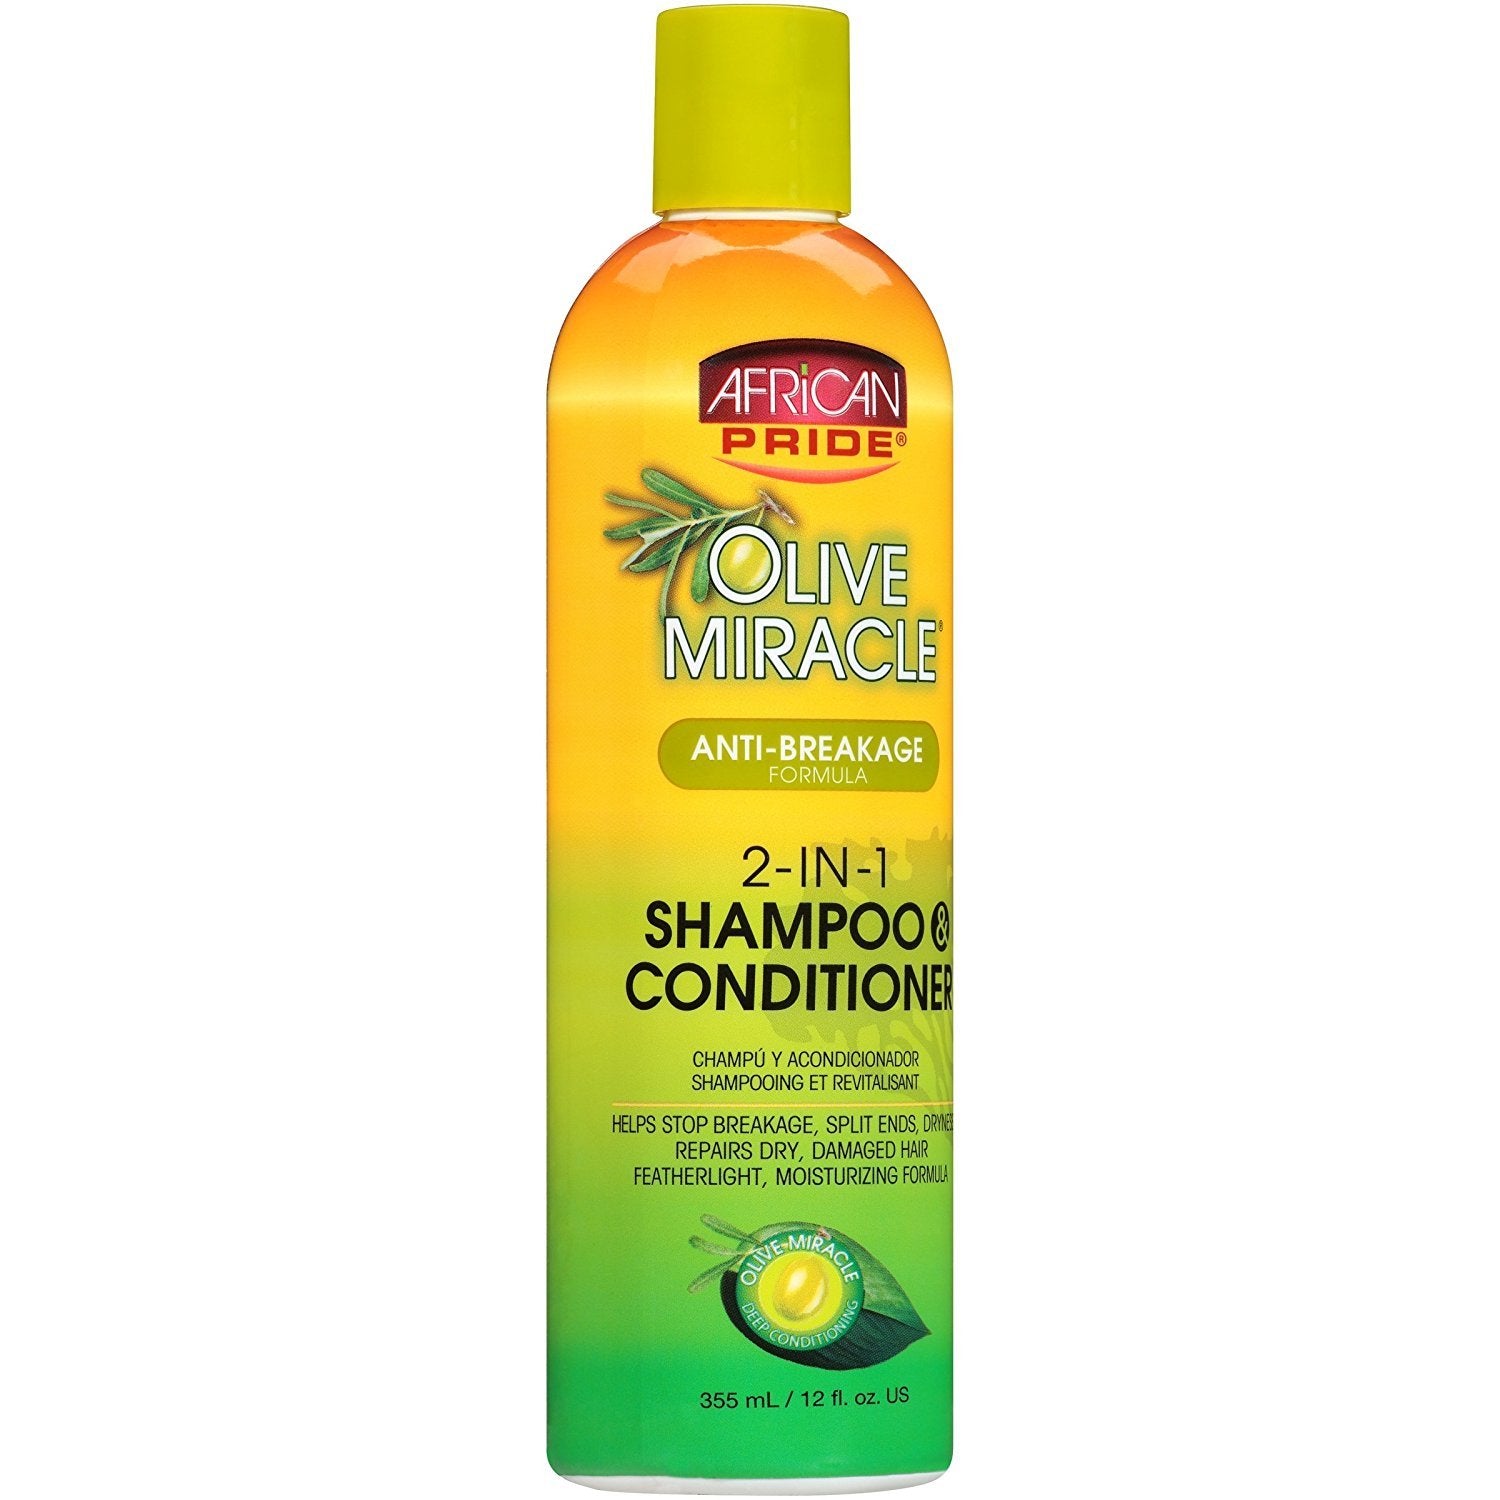 OLIVE MIRACLE 2-IN-1 SHAMPOO 12 OZ | AFRICAN PRIDE